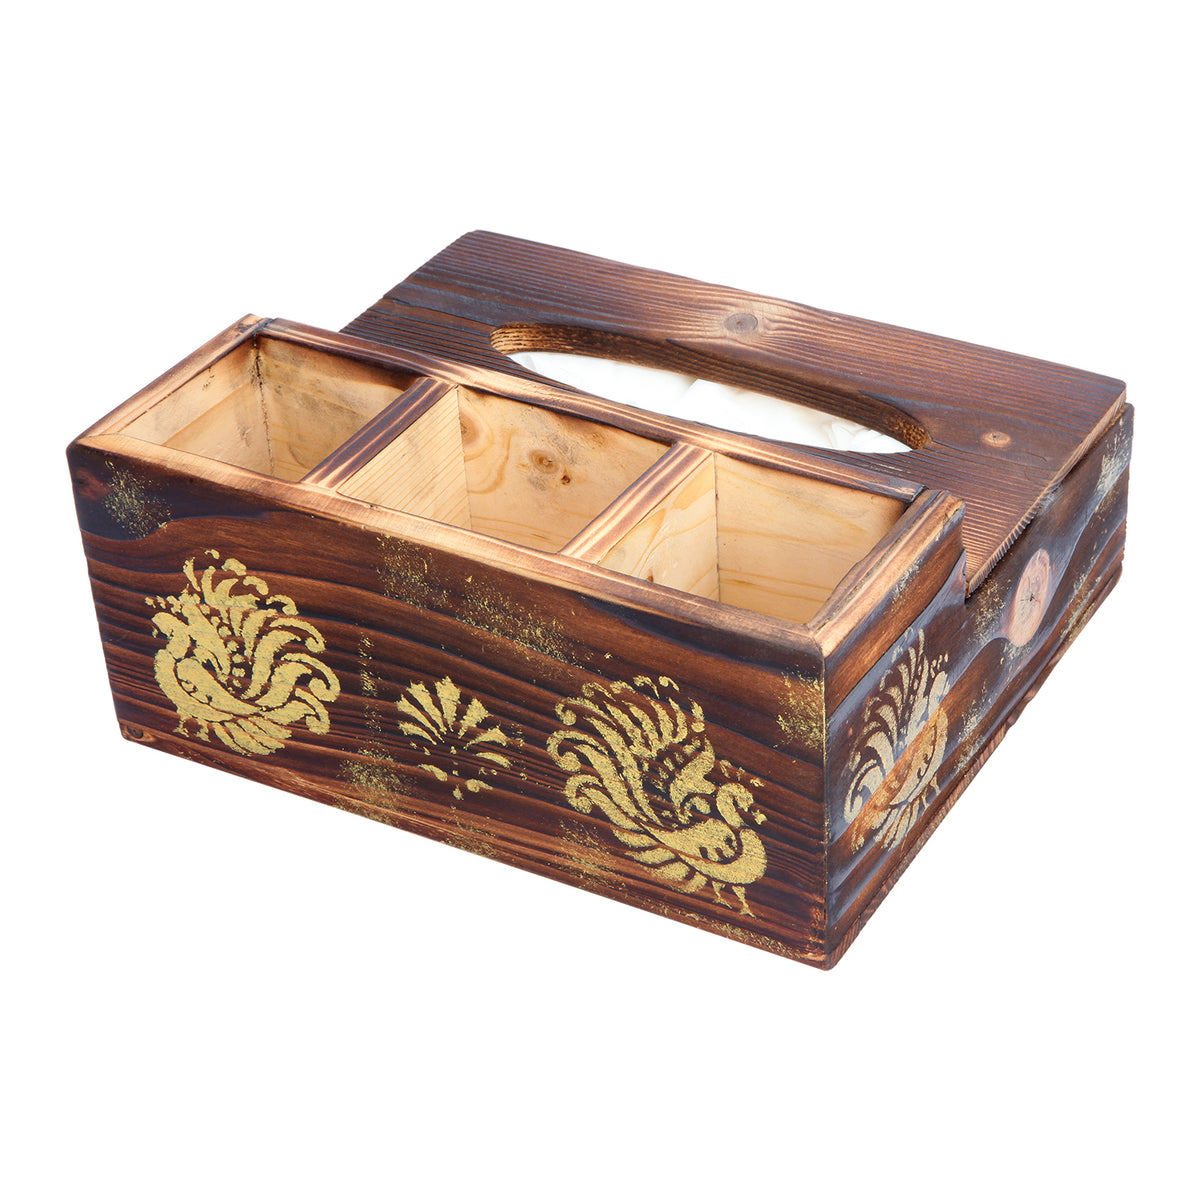 Rustic Wood Textured Multipurpose Tissue Holder With Gold Motif | Home / Office Organisers